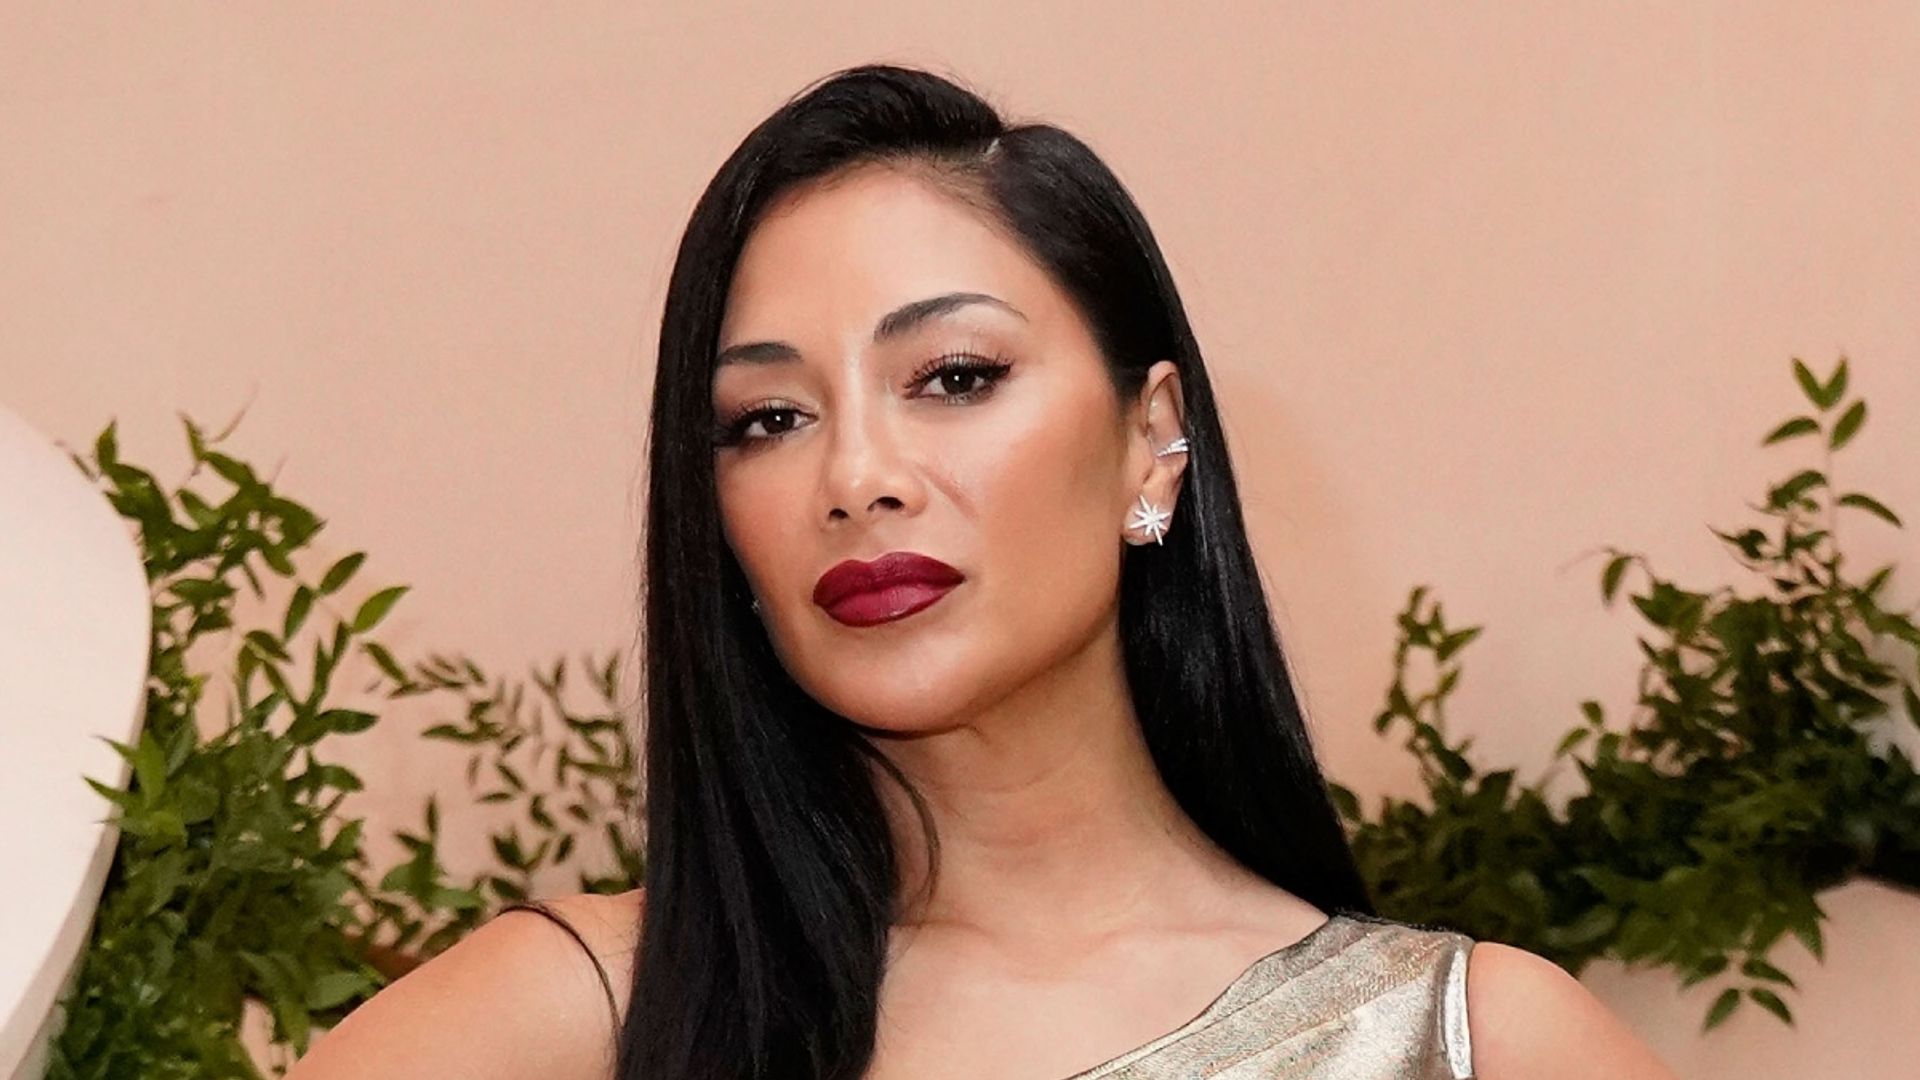 Nicole Scherzinger leaves fans and famous friends stunned with insane workout video